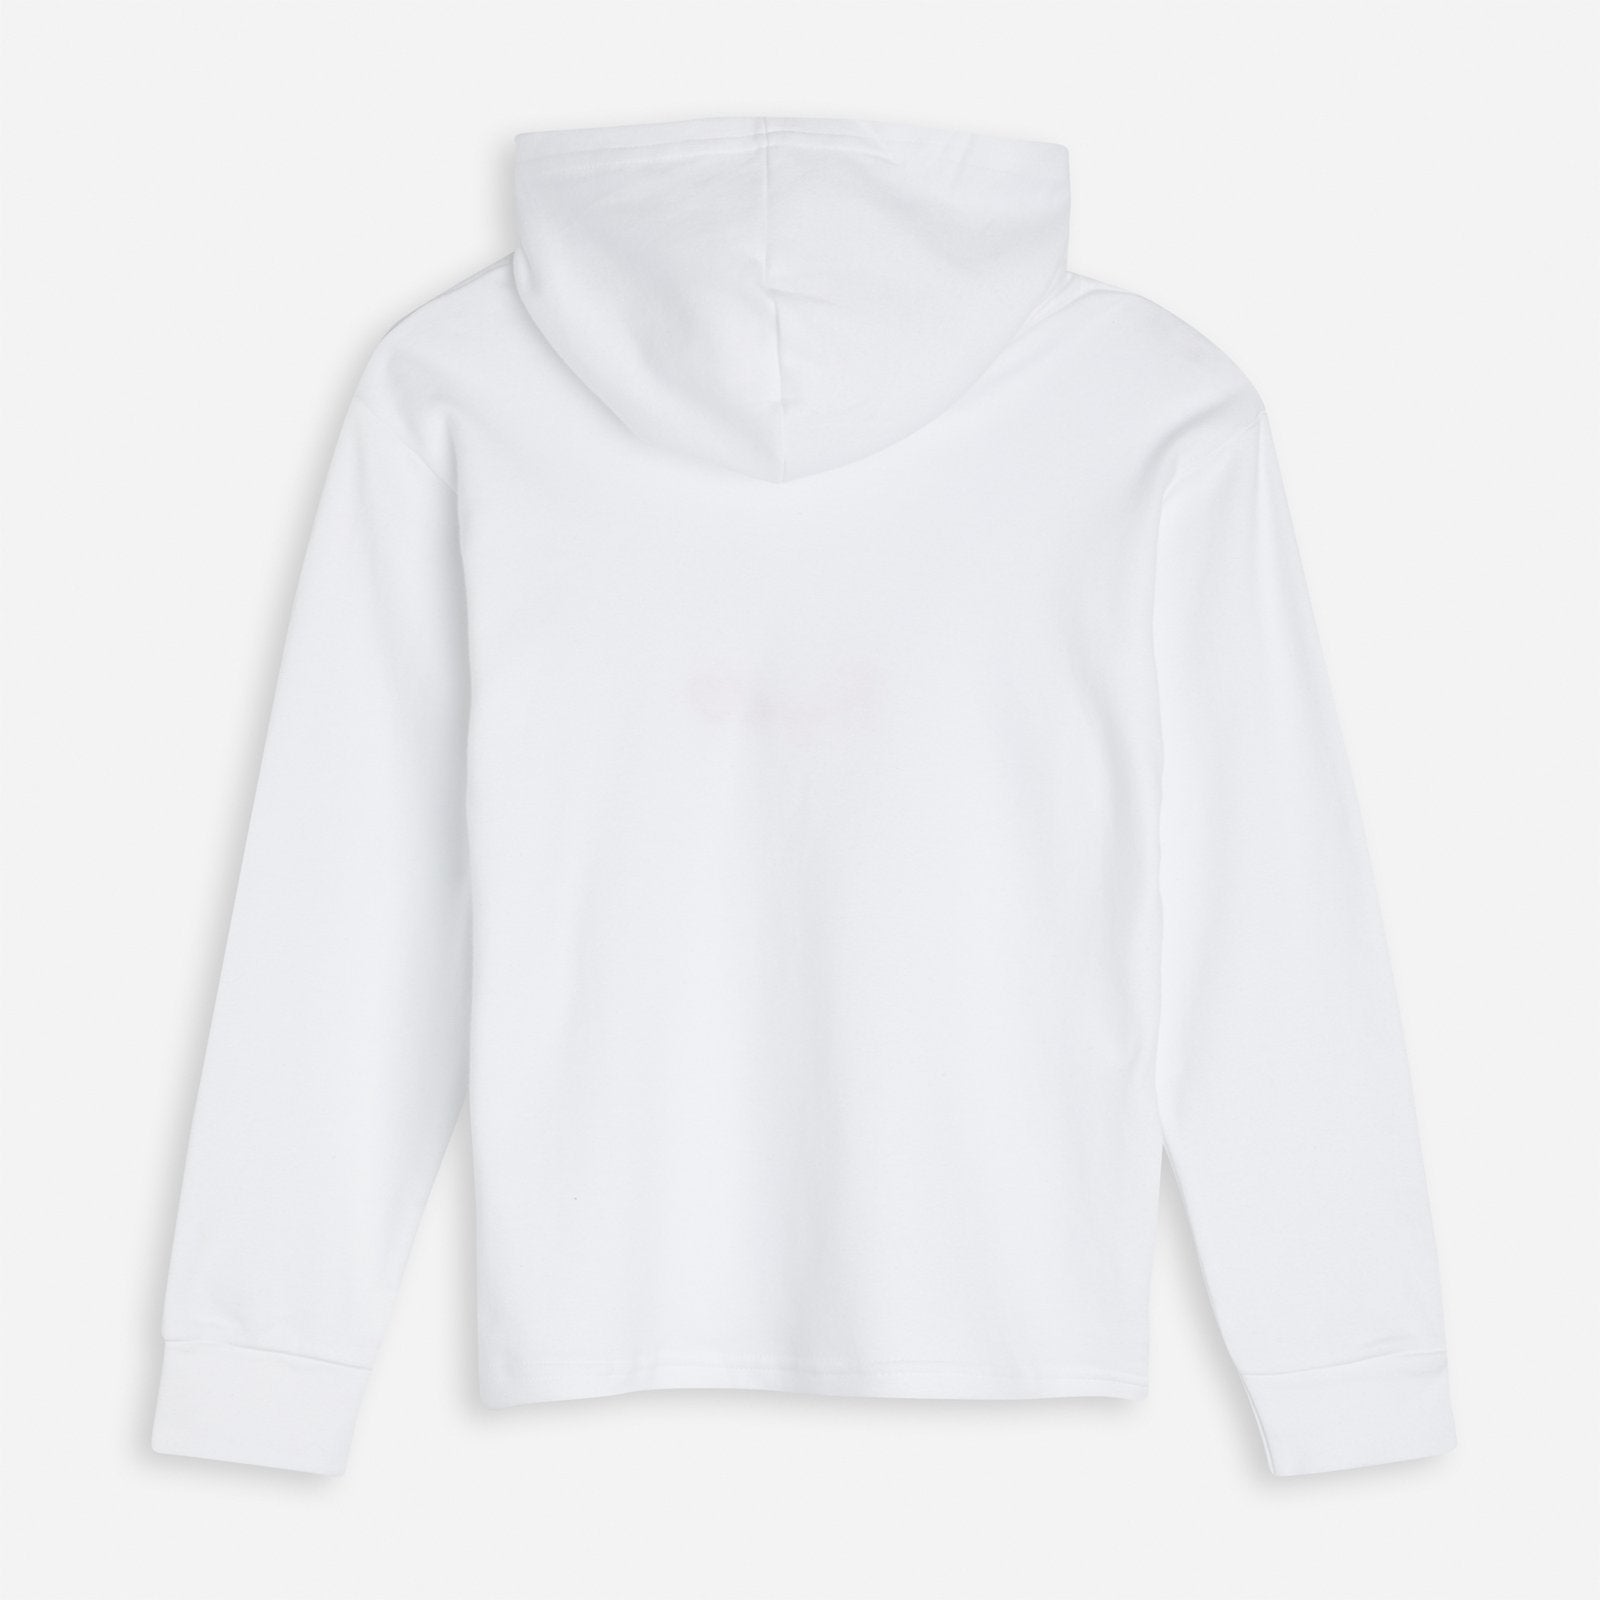 Embroidered White Hooded Top